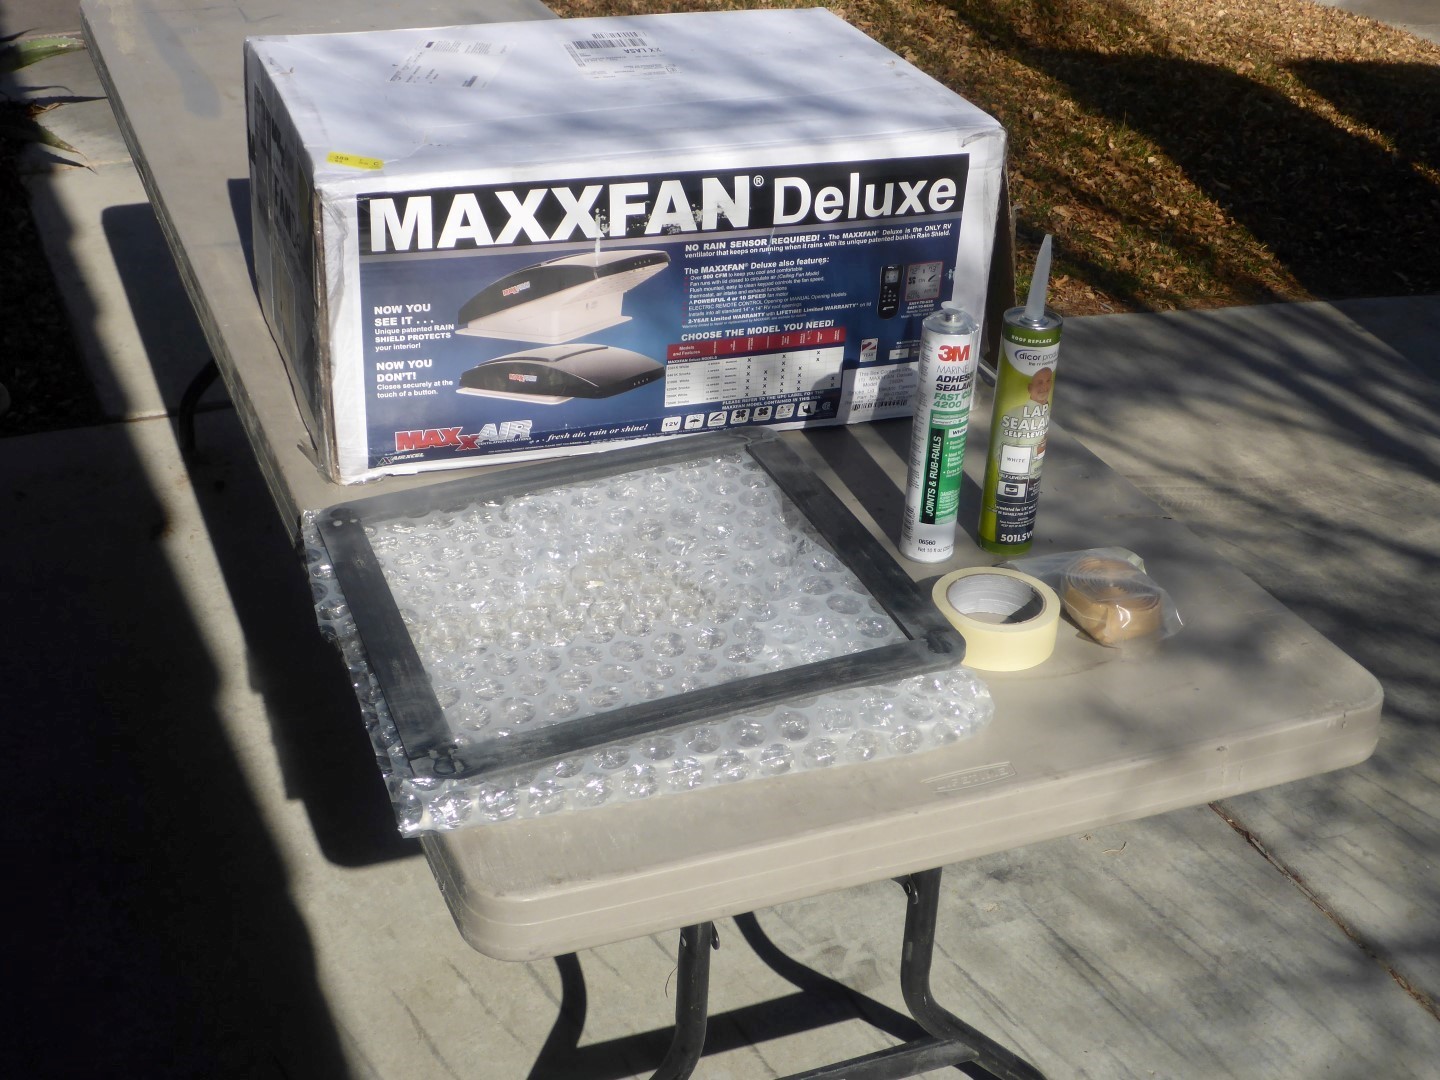 MaxxFan Deluxe Roof Vent Review - Updated Sept 2019 - Seeking Sights